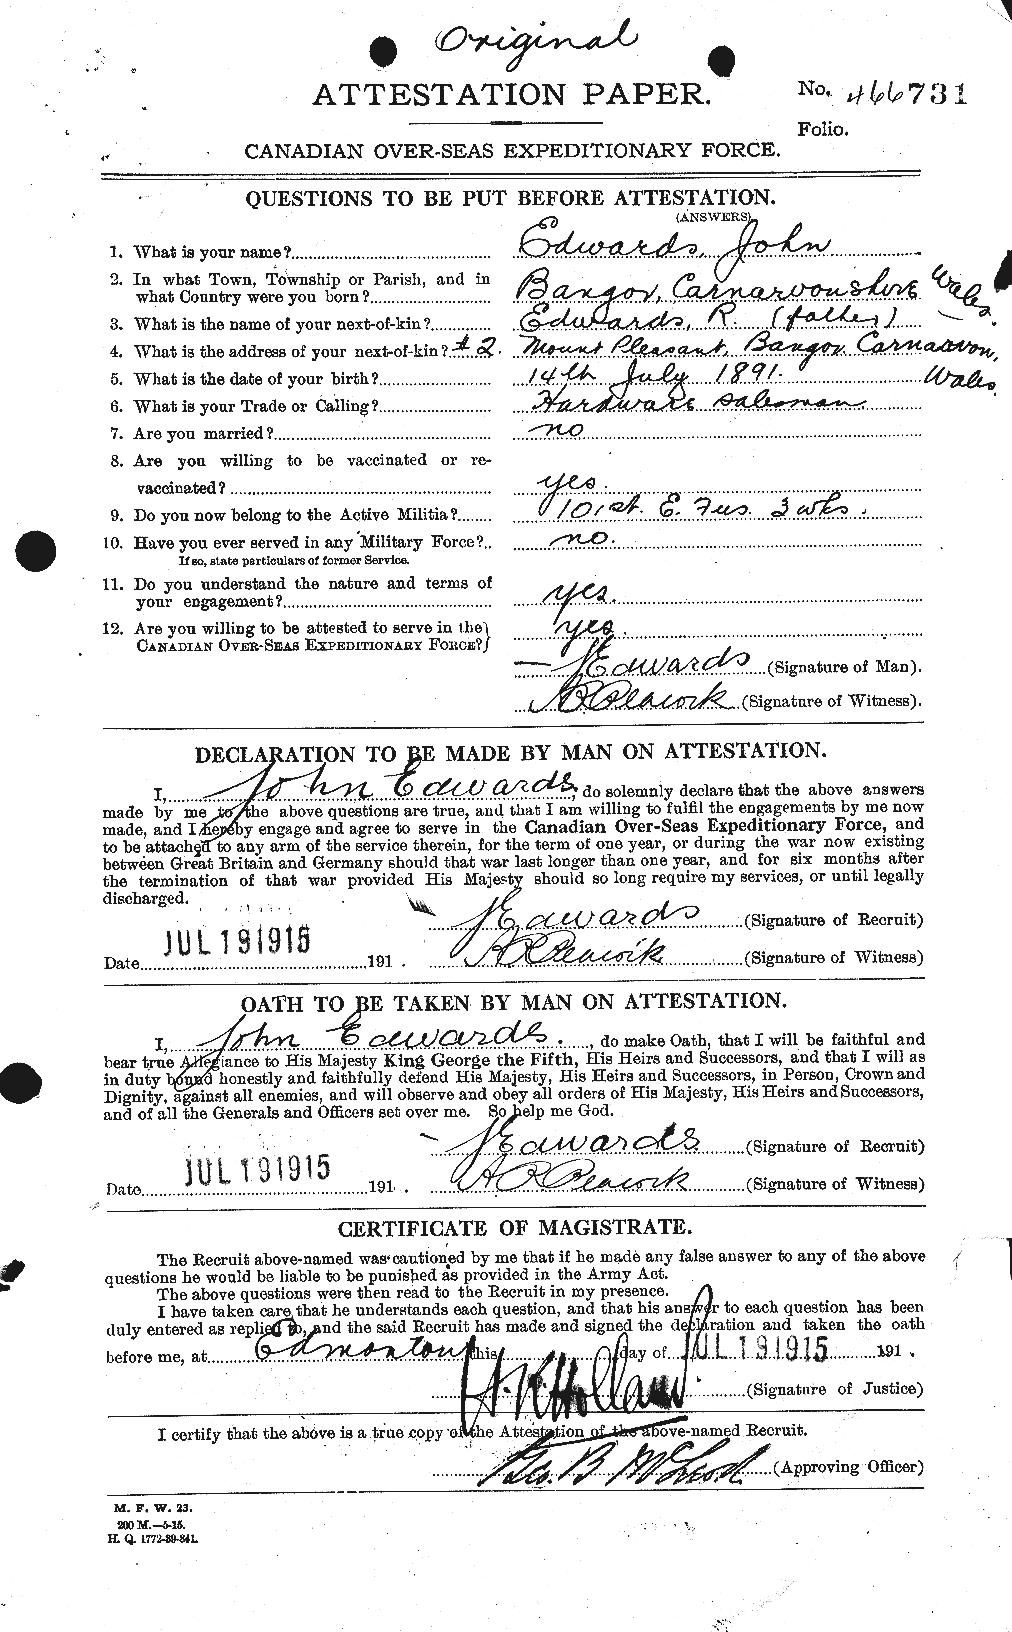 Personnel Records of the First World War - CEF 310108a